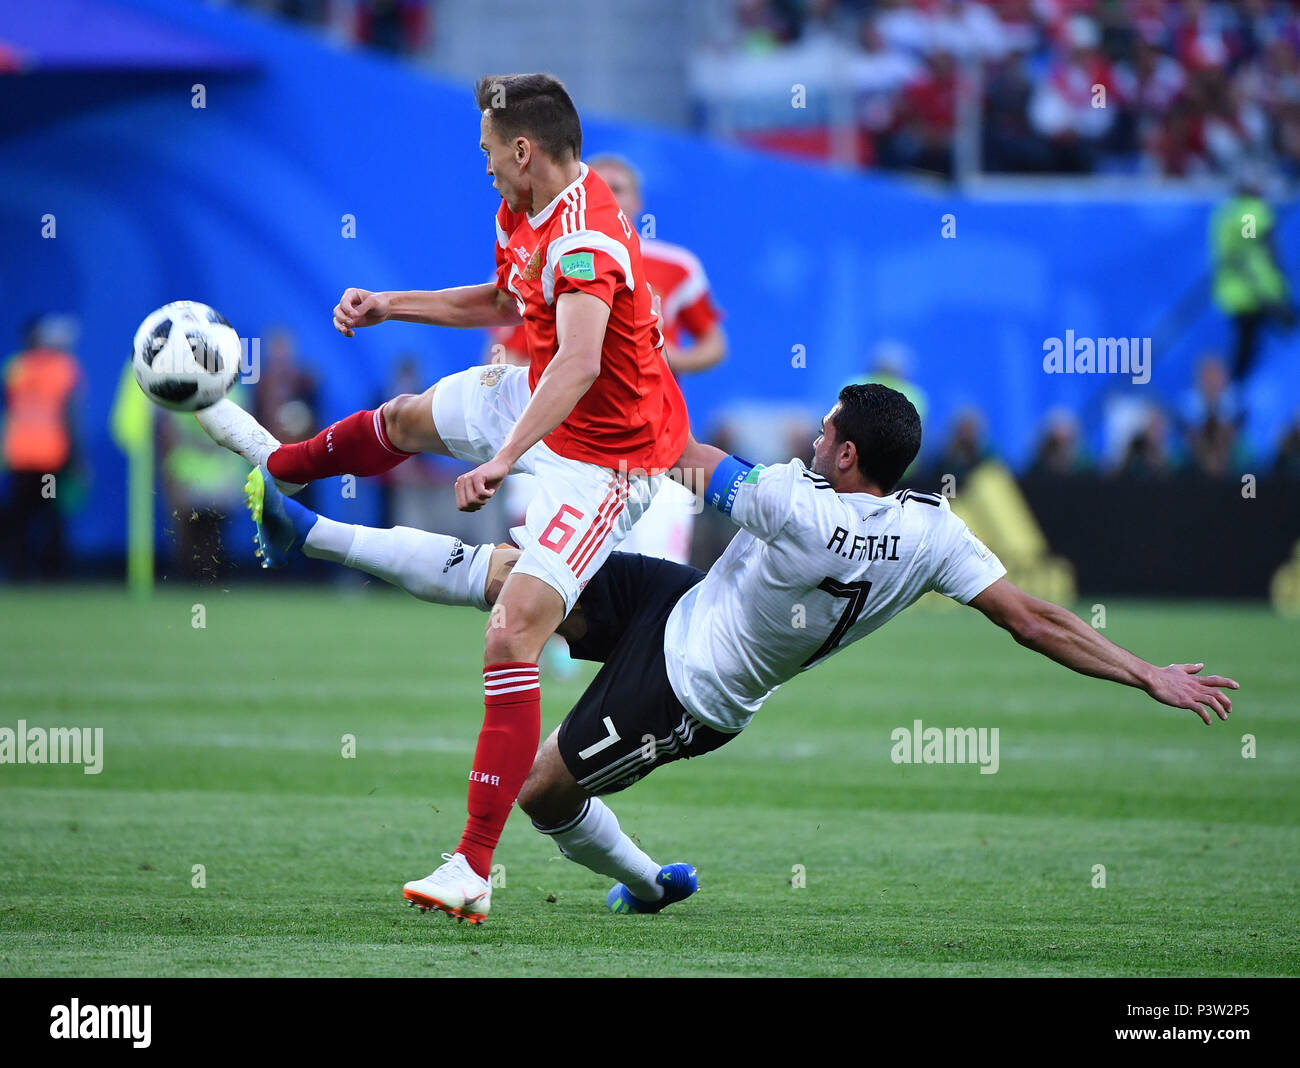 Saint Petersburg, Russia. 19th June, 2018. Denis Cheryshev (L) of Russia vies with Ahmed Fathi of Egypt during a Group A match between Russia and Egypt at the 2018 FIFA World Cup in Saint Petersburg, Russia, June 19, 2018. Credit: Li Ga/Xinhua/Alamy Live News Stock Photo